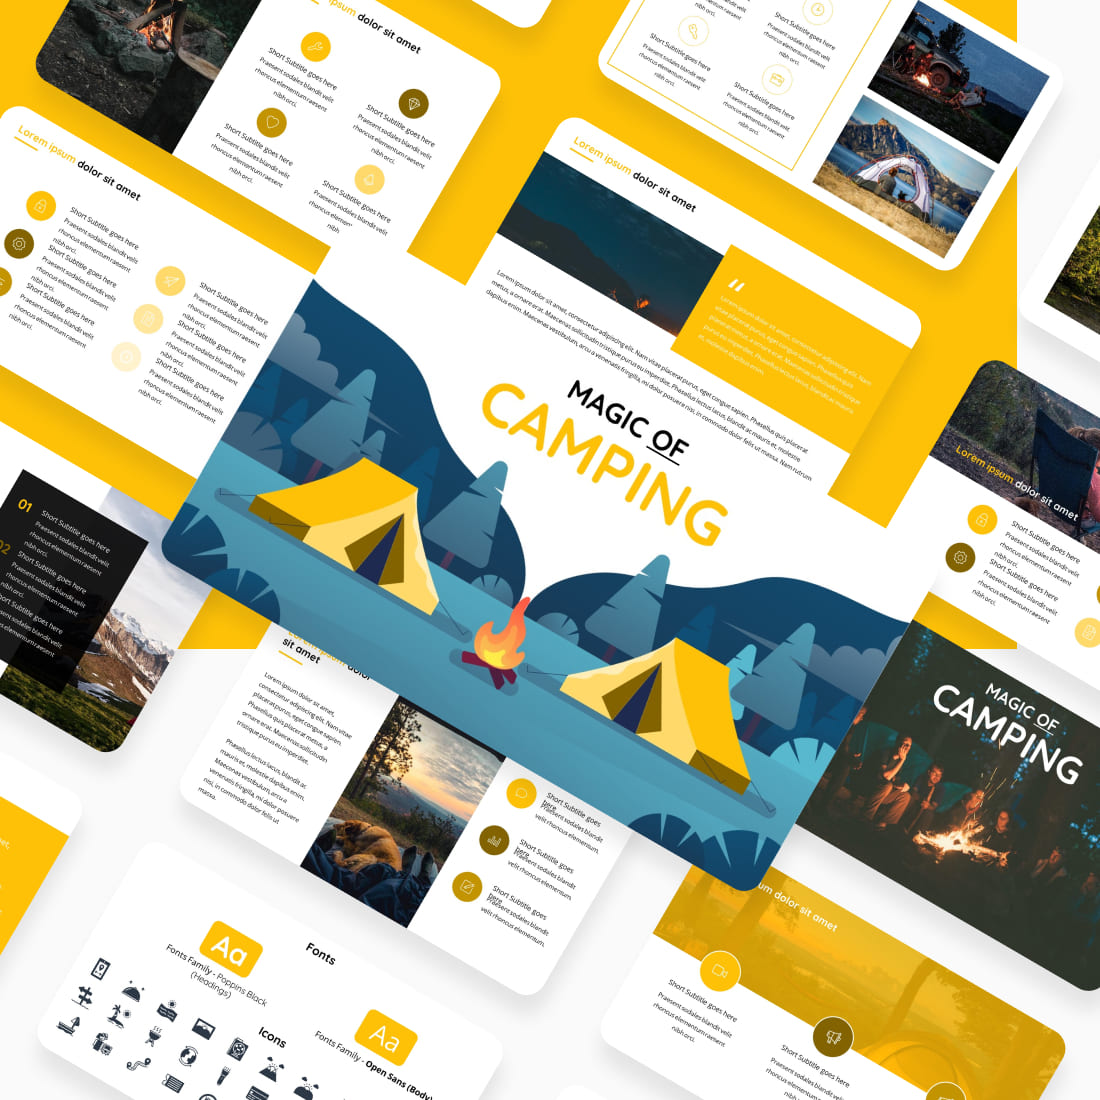 Camping Google Slides Theme cover image.